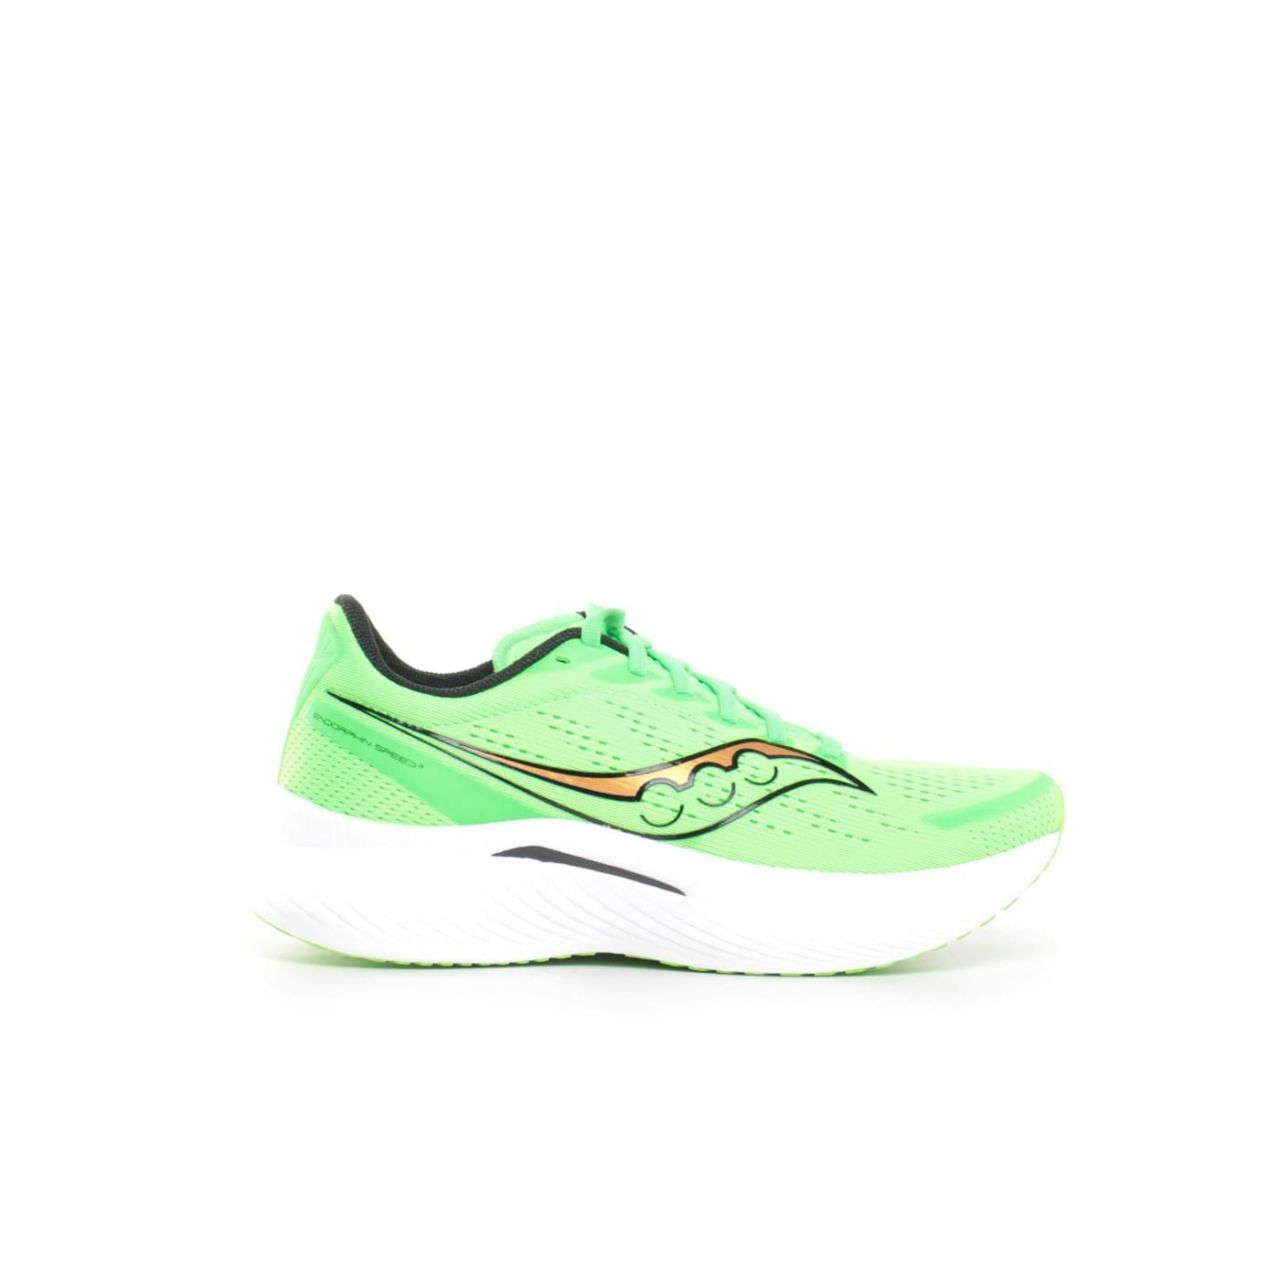 SAUCONY ENDORPHIN SPEED 3 SLIME Chaussures running saucony